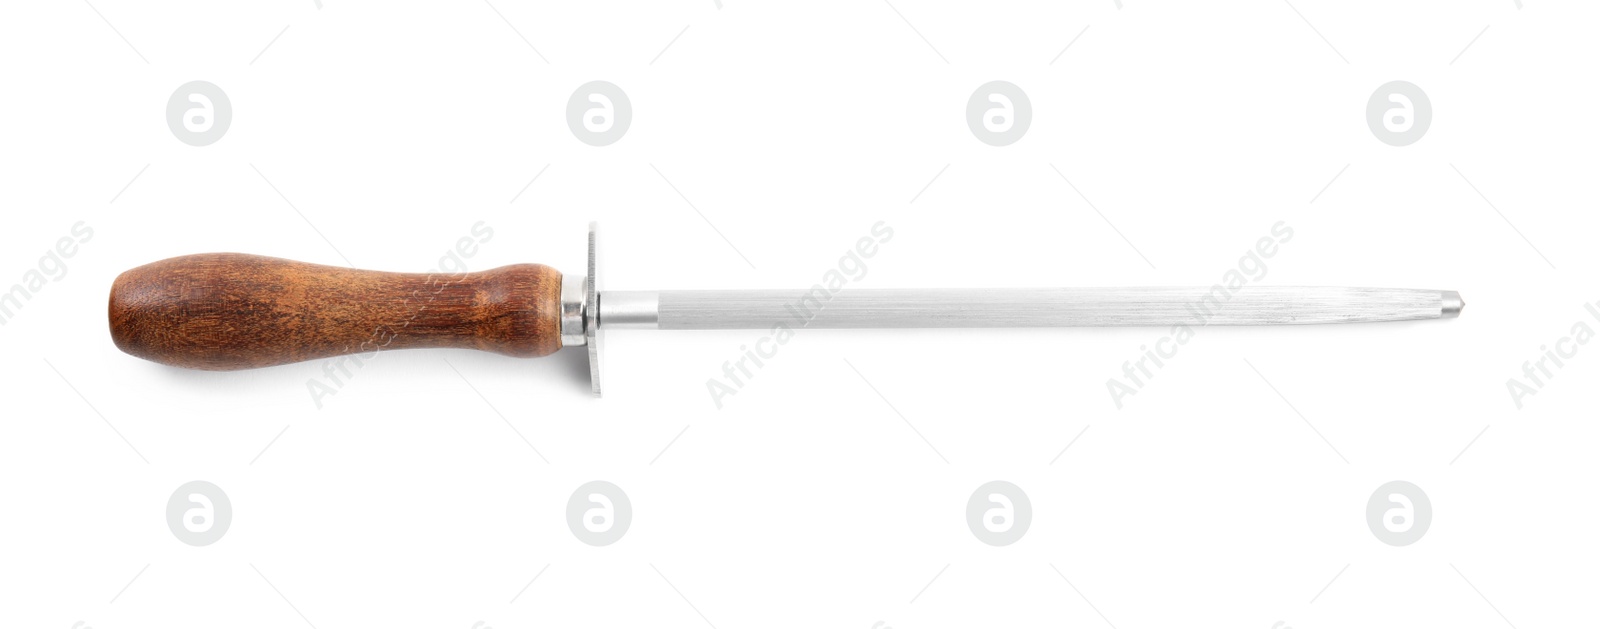 Photo of Sharpening steel with wooden handle isolated on white, top view